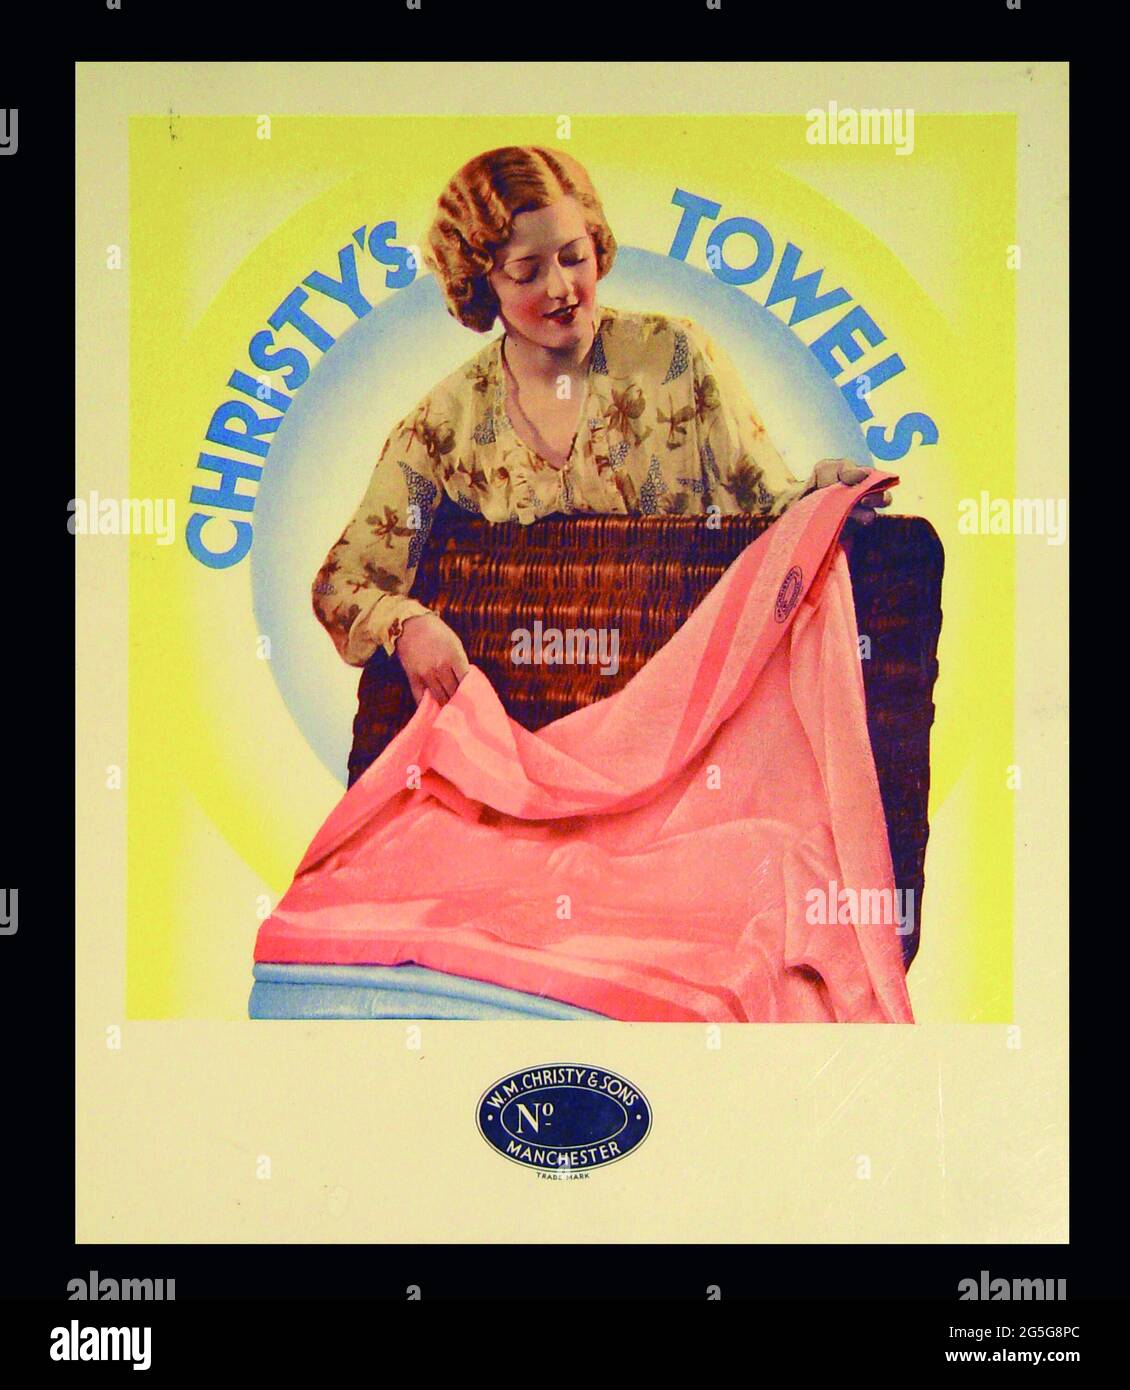 Christy Towels. Drapery store. Display card advert. 1930s. Thirties. Art deco design. Advertising. Pretty girl with Thirties permanent wave, wicker basket, pink towel. Manchester Stock Photo